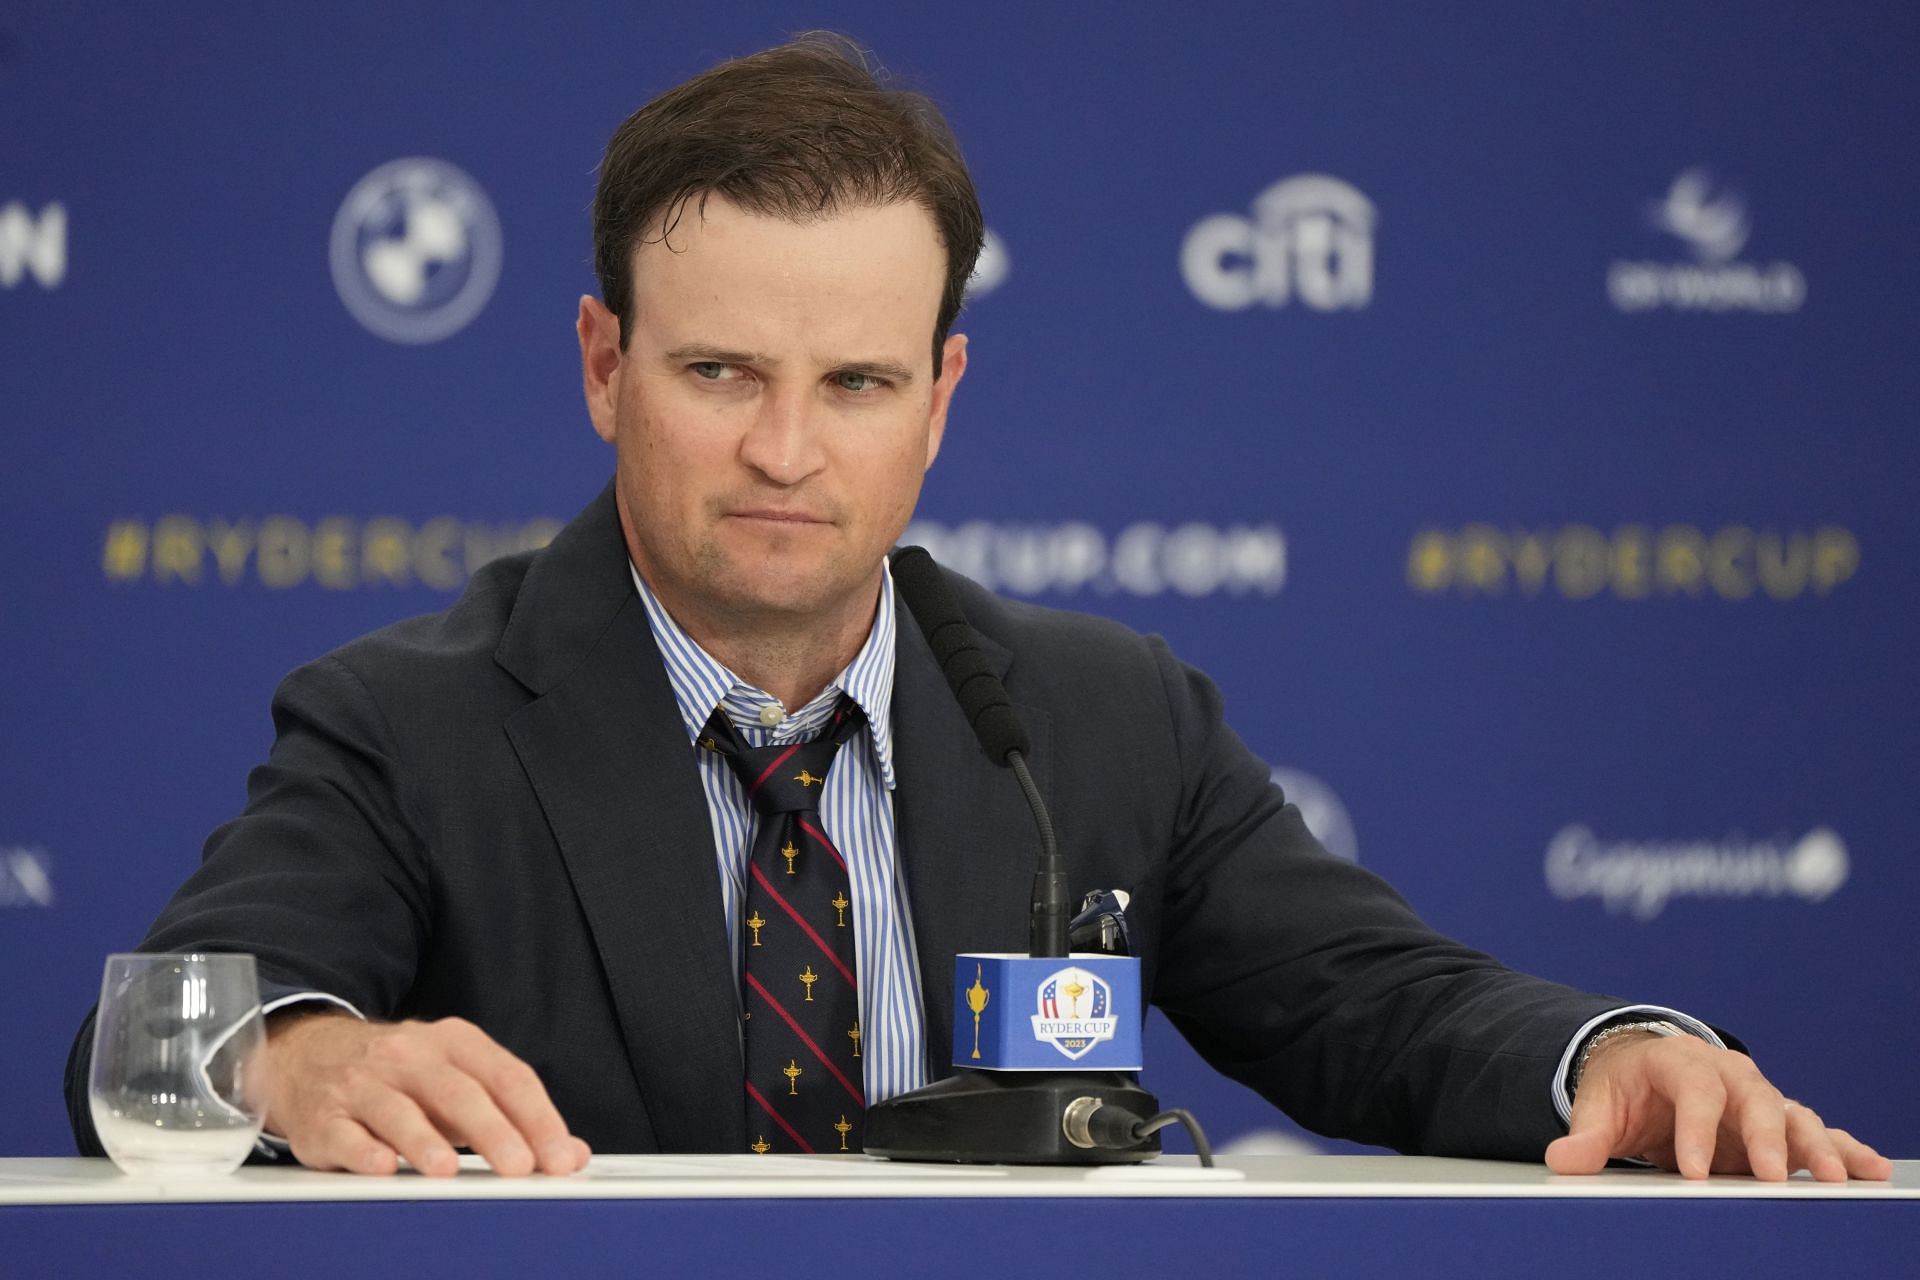 United States&#039; Team Captain Zach Johnson listens to a question from the media at a press conference at the Ryder Cup (Image via AP Photo)